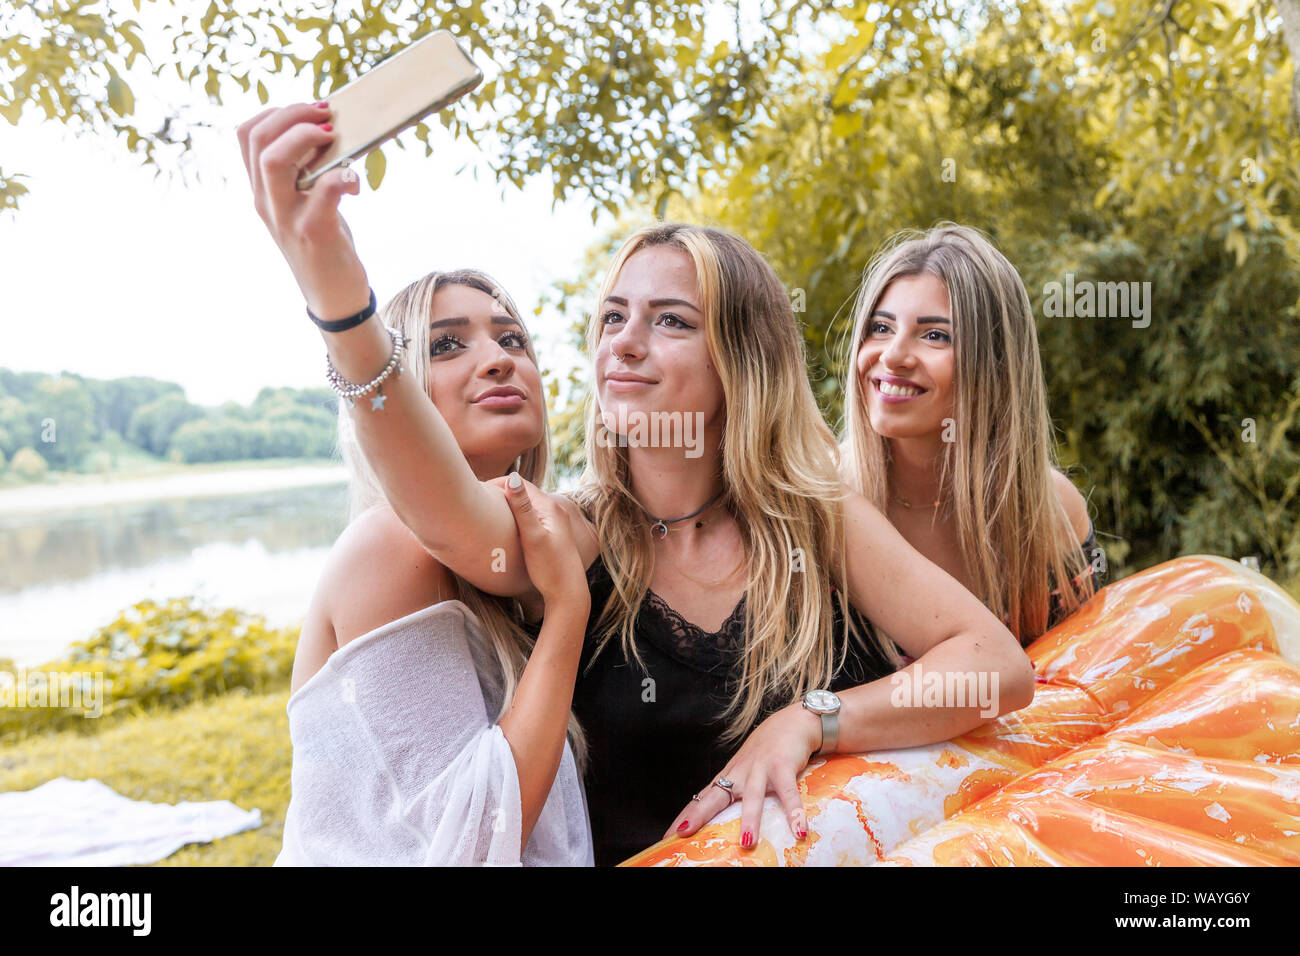 female millennial girlfriends taking a selfie outdoors on the river. youth summer vacation concept Stock Photo